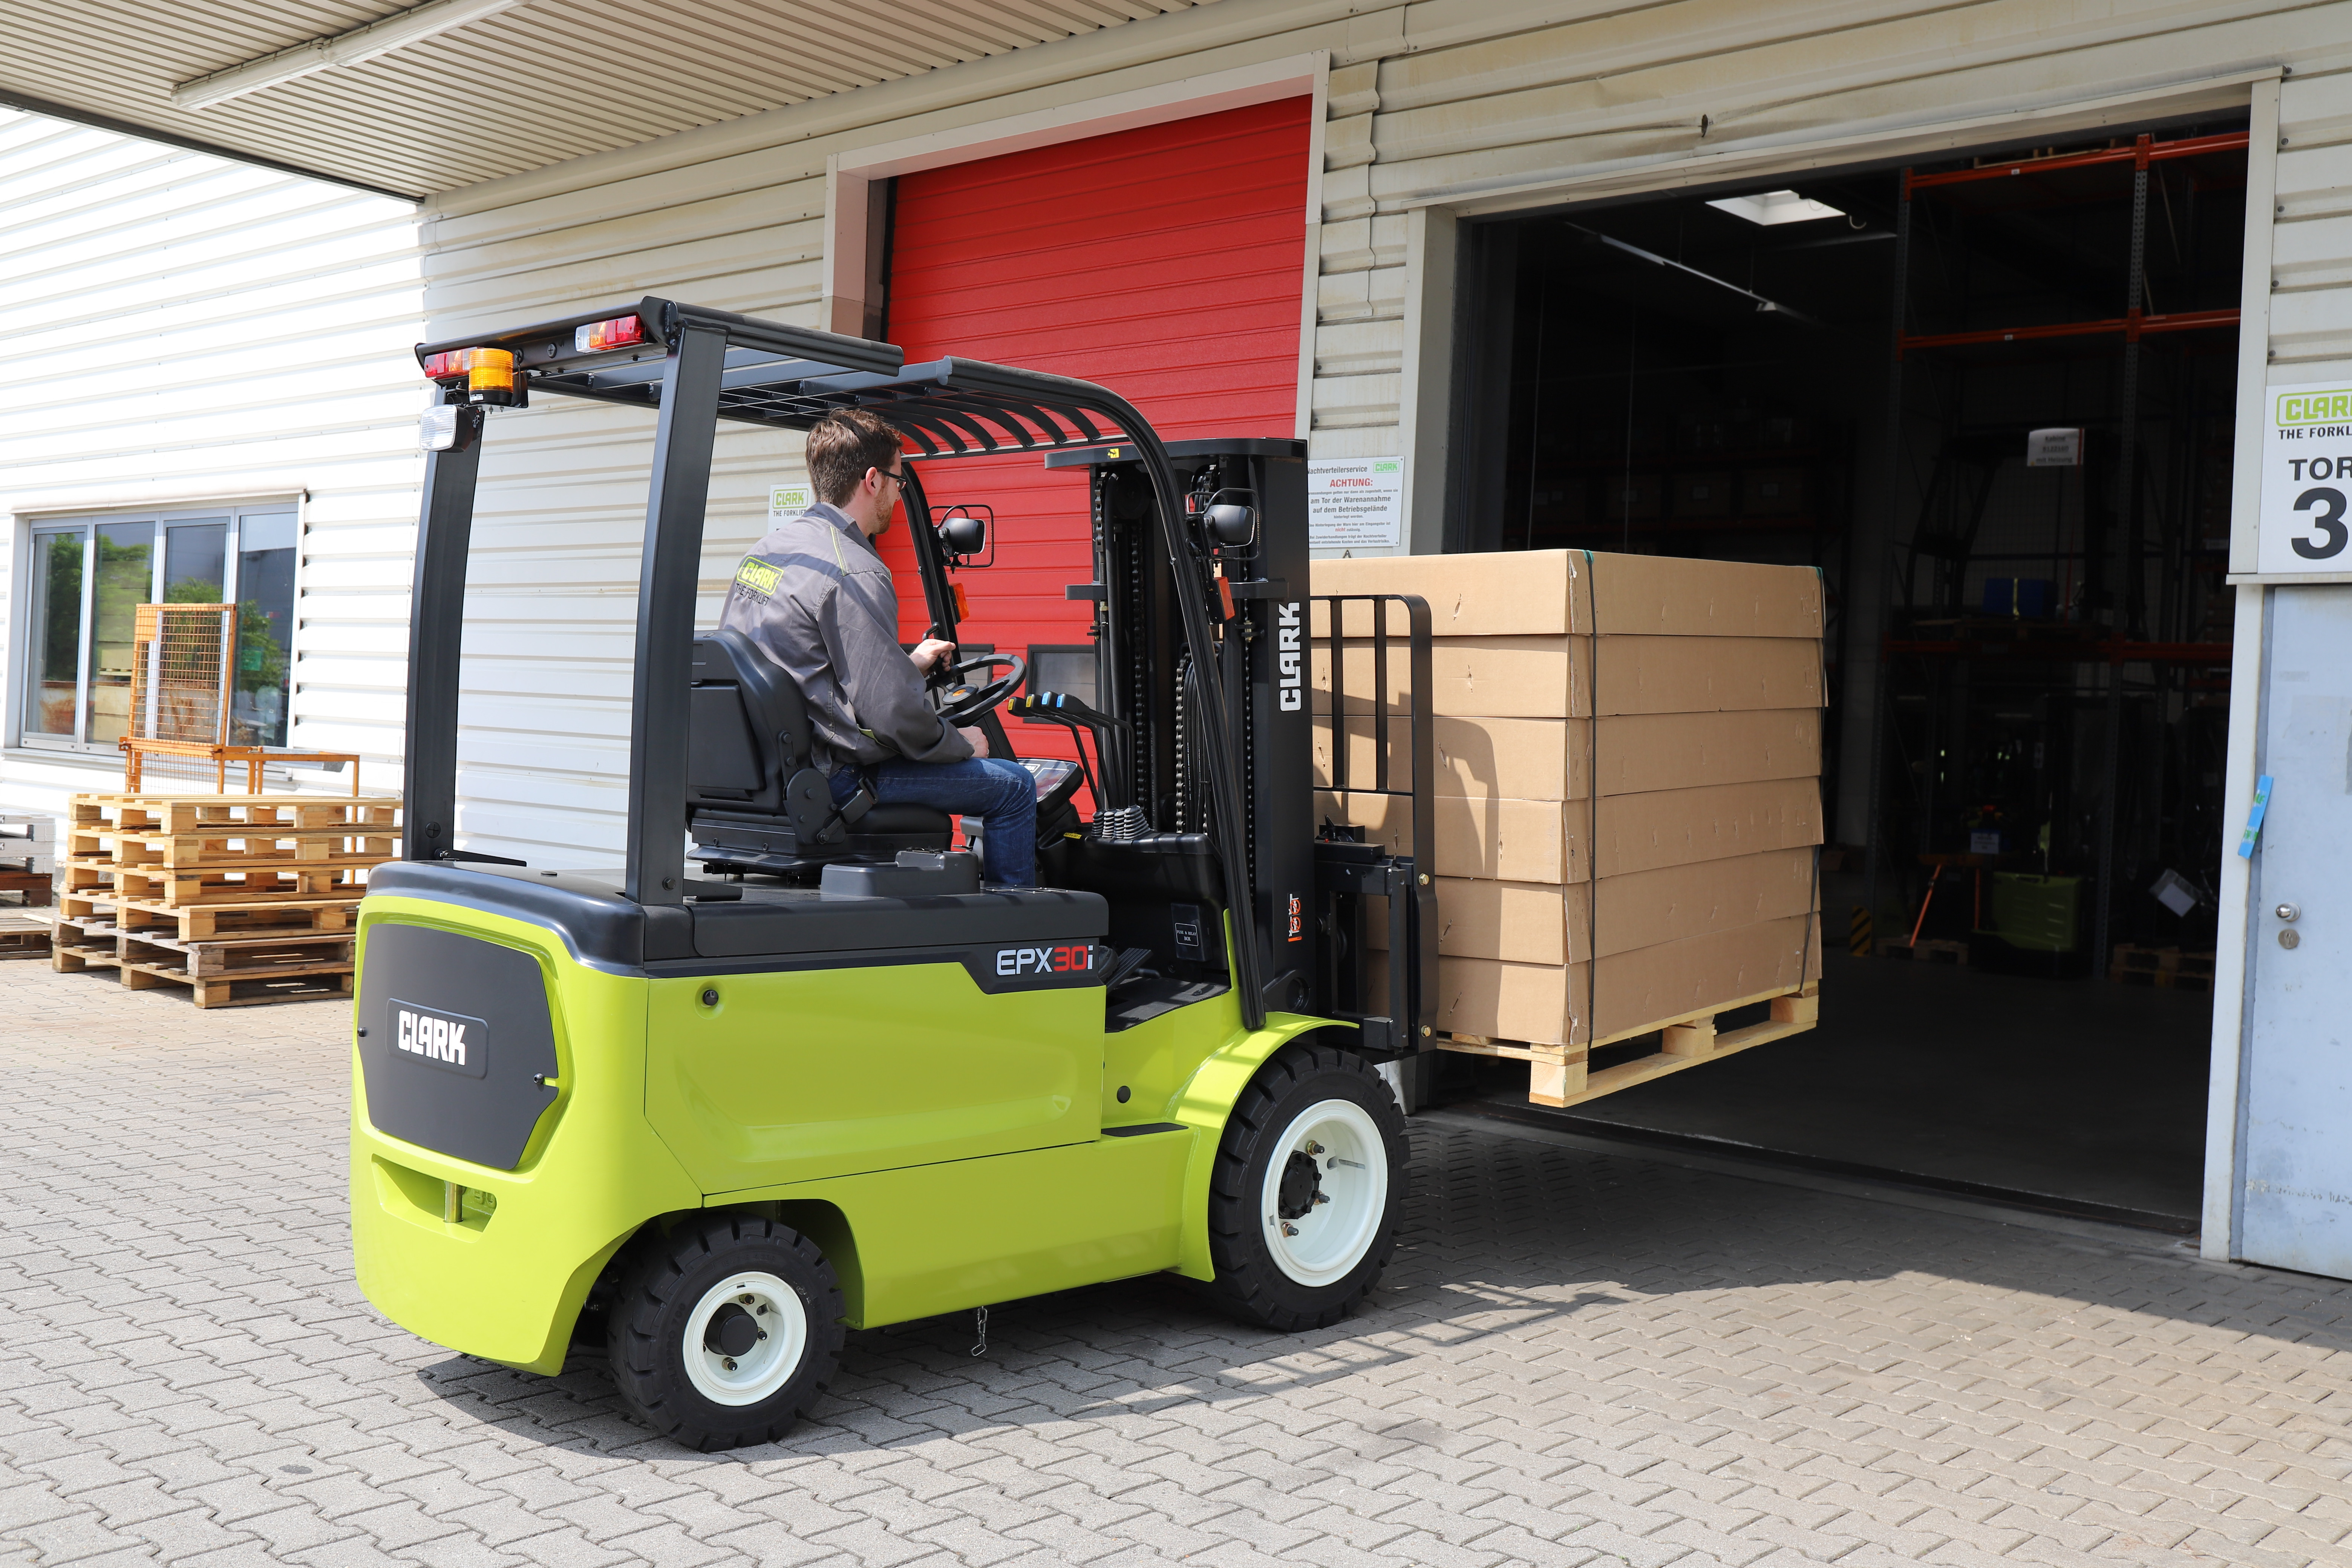 Clark S Electric Forklift To Compete With Ic Versions Industrial Vehicle Technology International